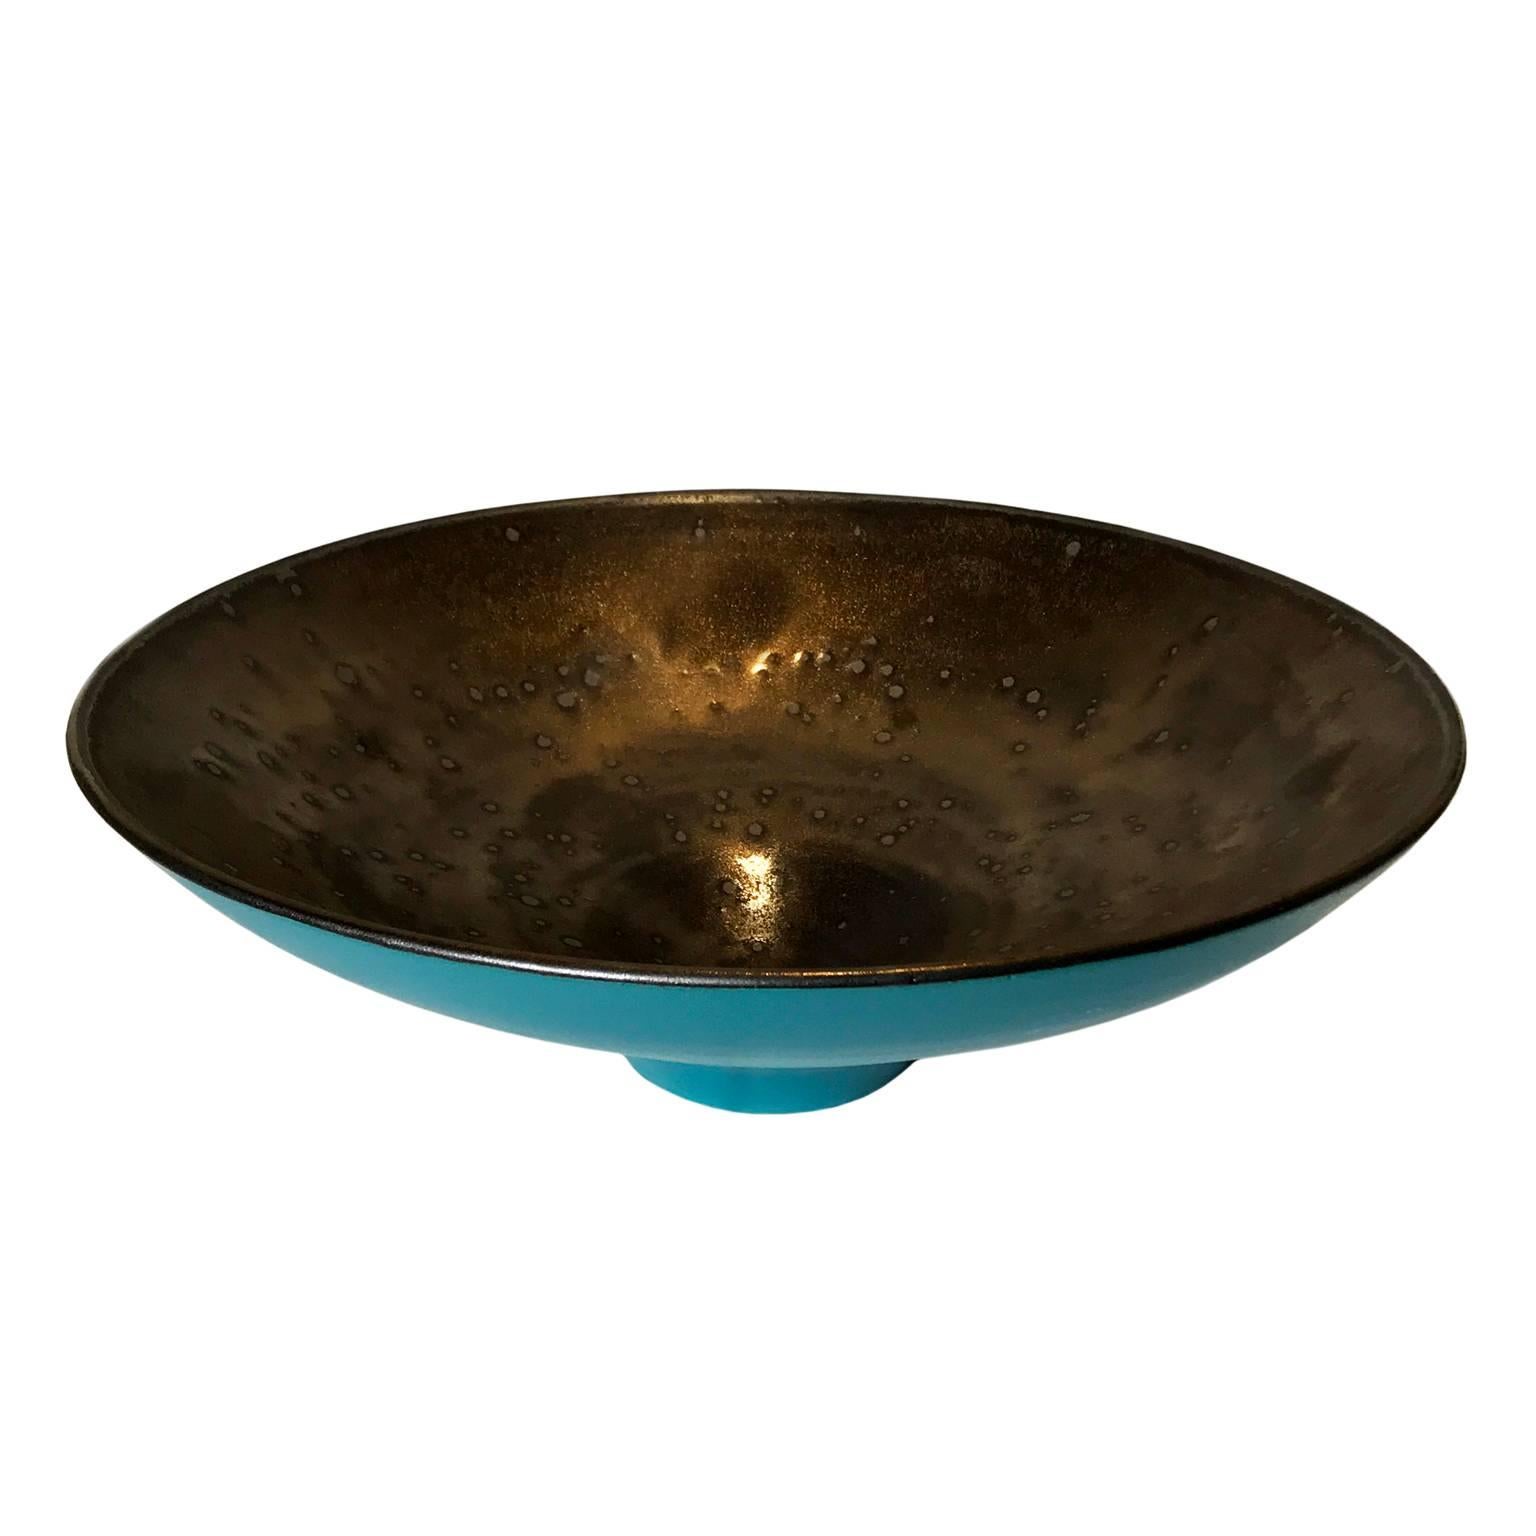 Wide matte turquoise glaze curved ceramic bowl with gold glaze interior by Sandi Fellman, USA, 2017.

Veteran photographer Sandi Fellman's ceramic vessels are an exploration of a new medium. The forms, palettes, and sensuality of her photos can be